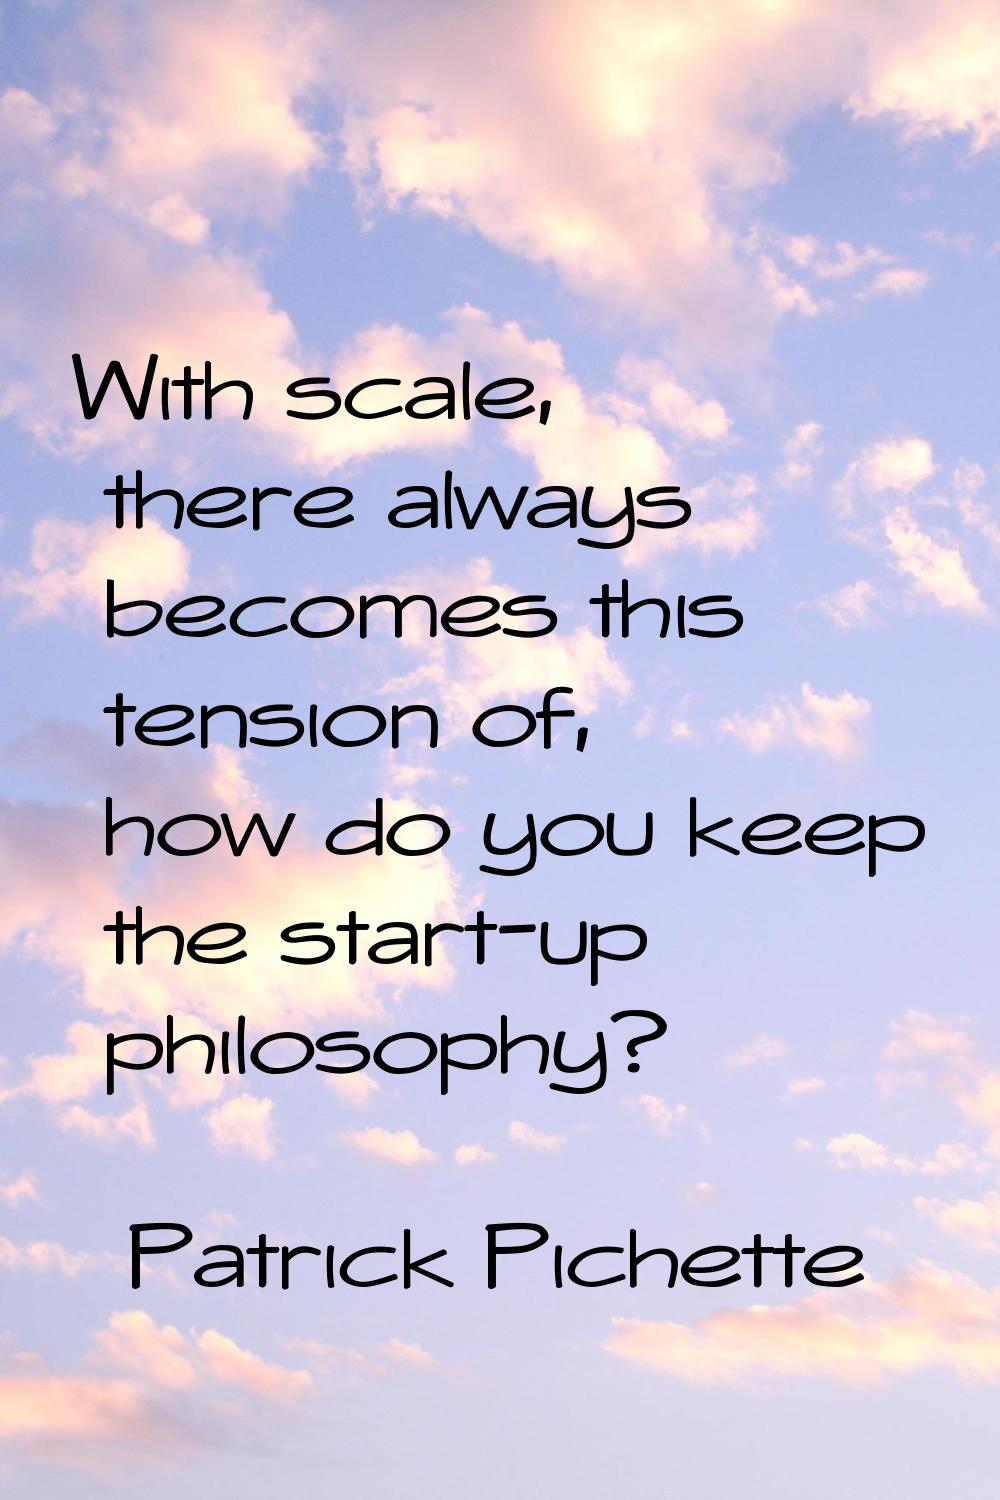 With scale, there always becomes this tension of, how do you keep the start-up philosophy?